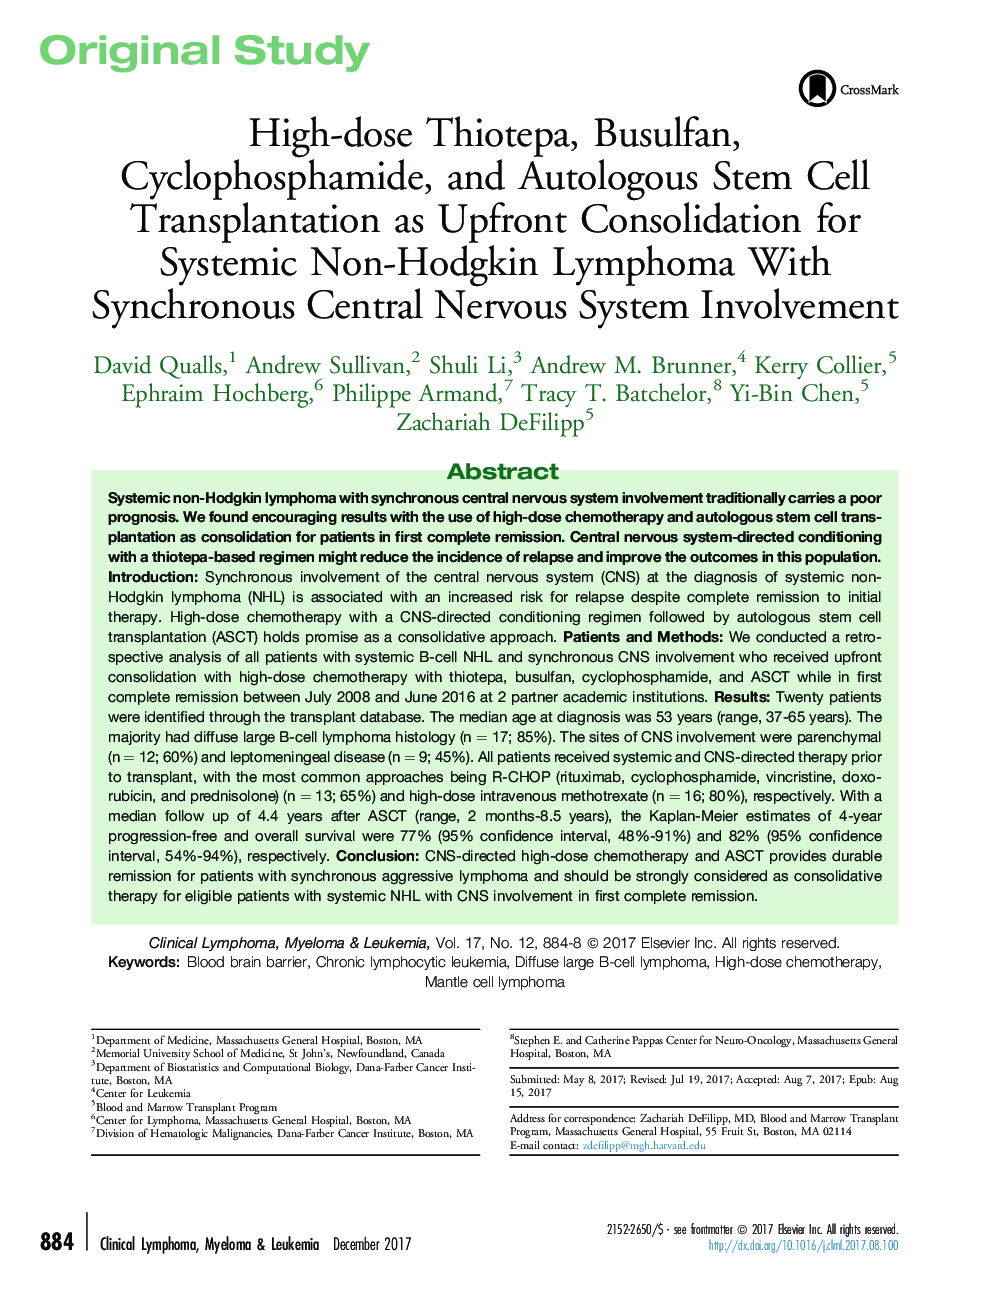 High-dose Thiotepa, Busulfan, Cyclophosphamide, and Autologous Stem Cell Transplantation as Upfront Consolidation for Systemic Non-Hodgkin Lymphoma With Synchronous Central Nervous System Involvement